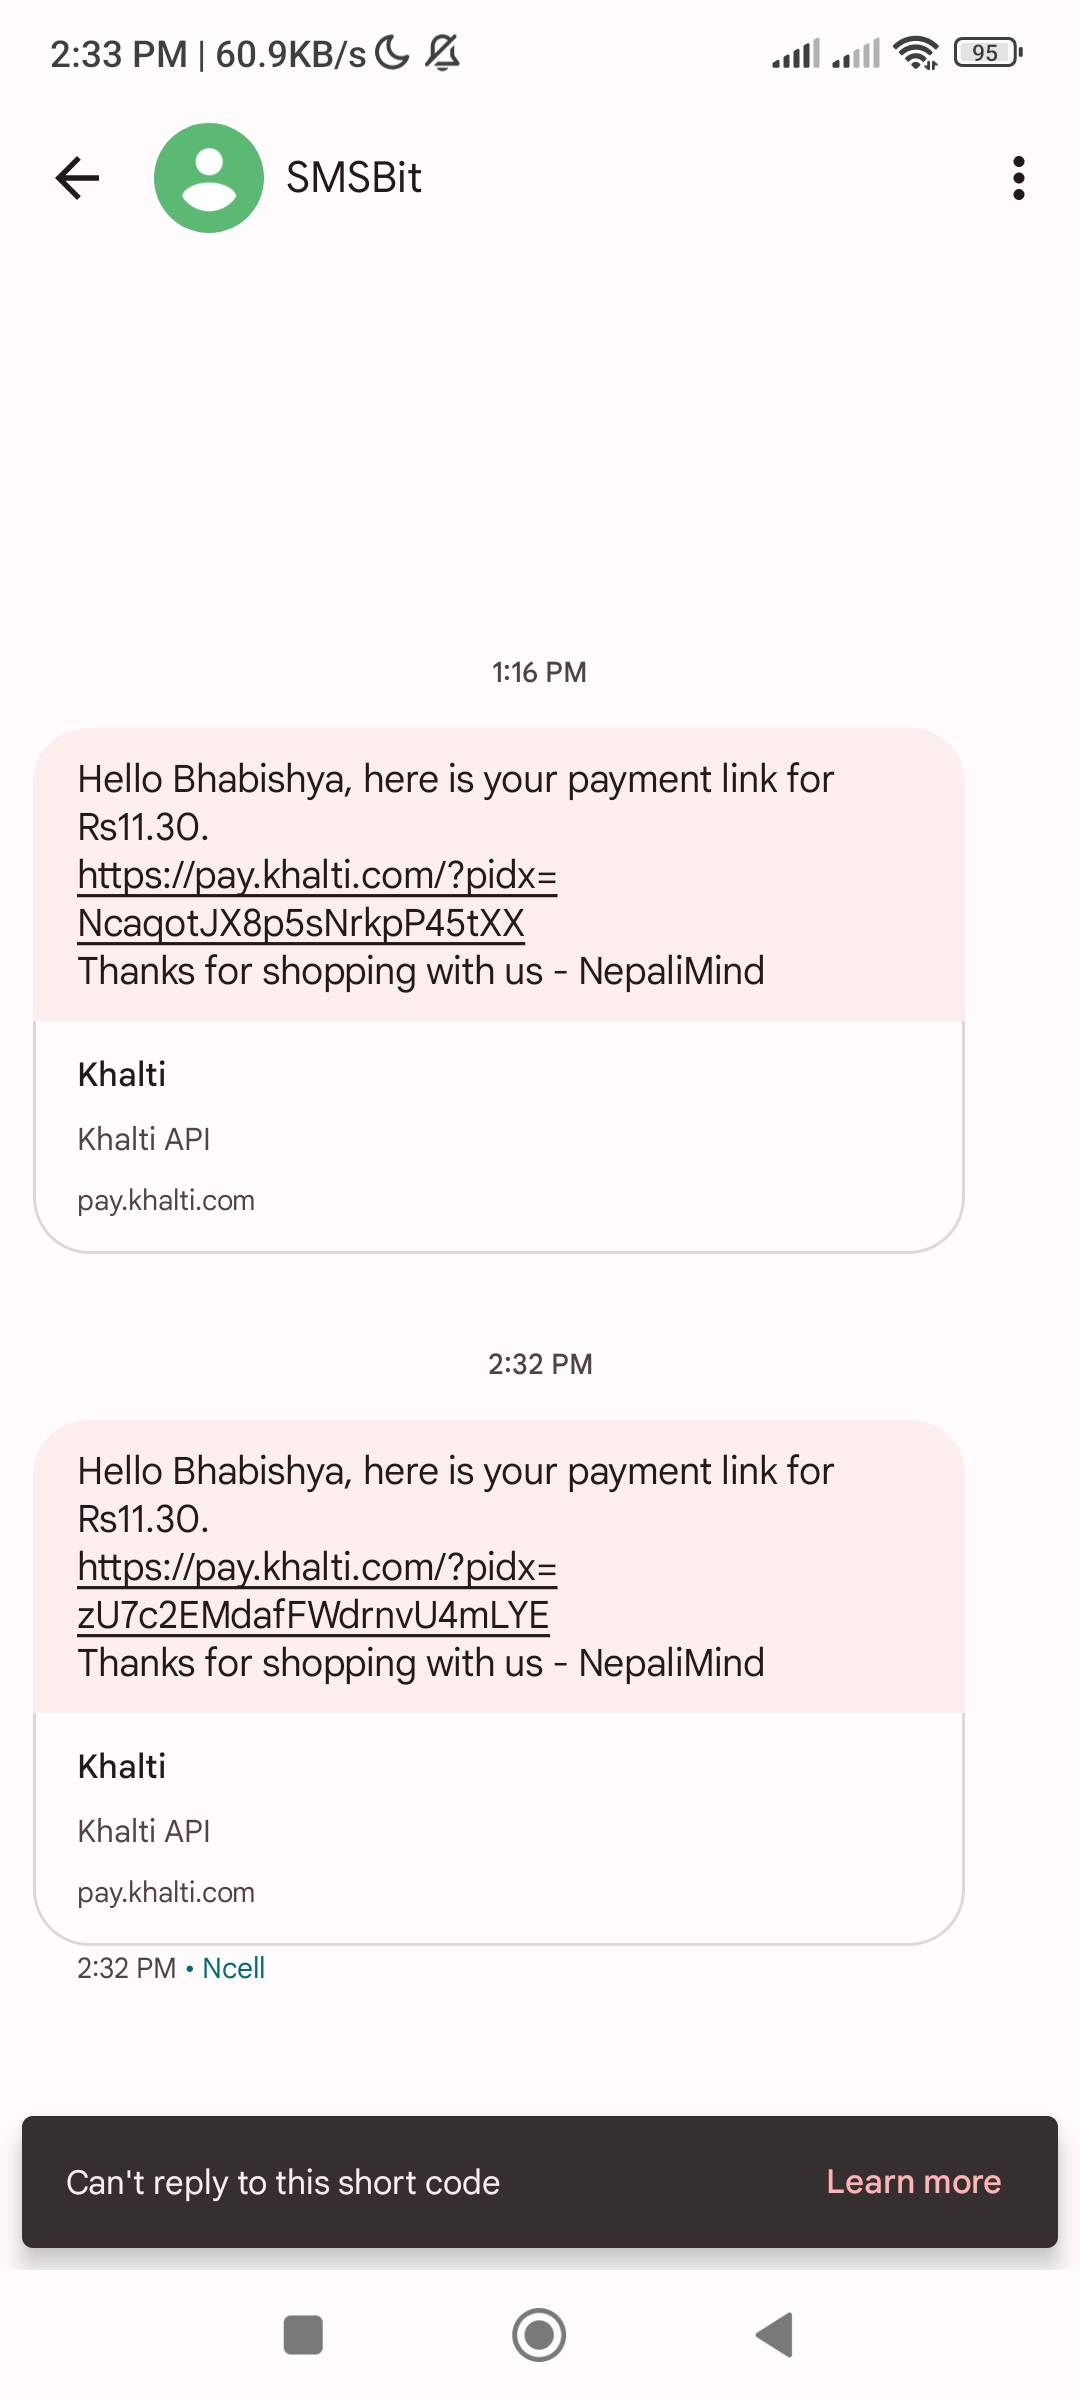 SMS received for Khalti PG on Pabbly Connect for Shopify - NepaliMind